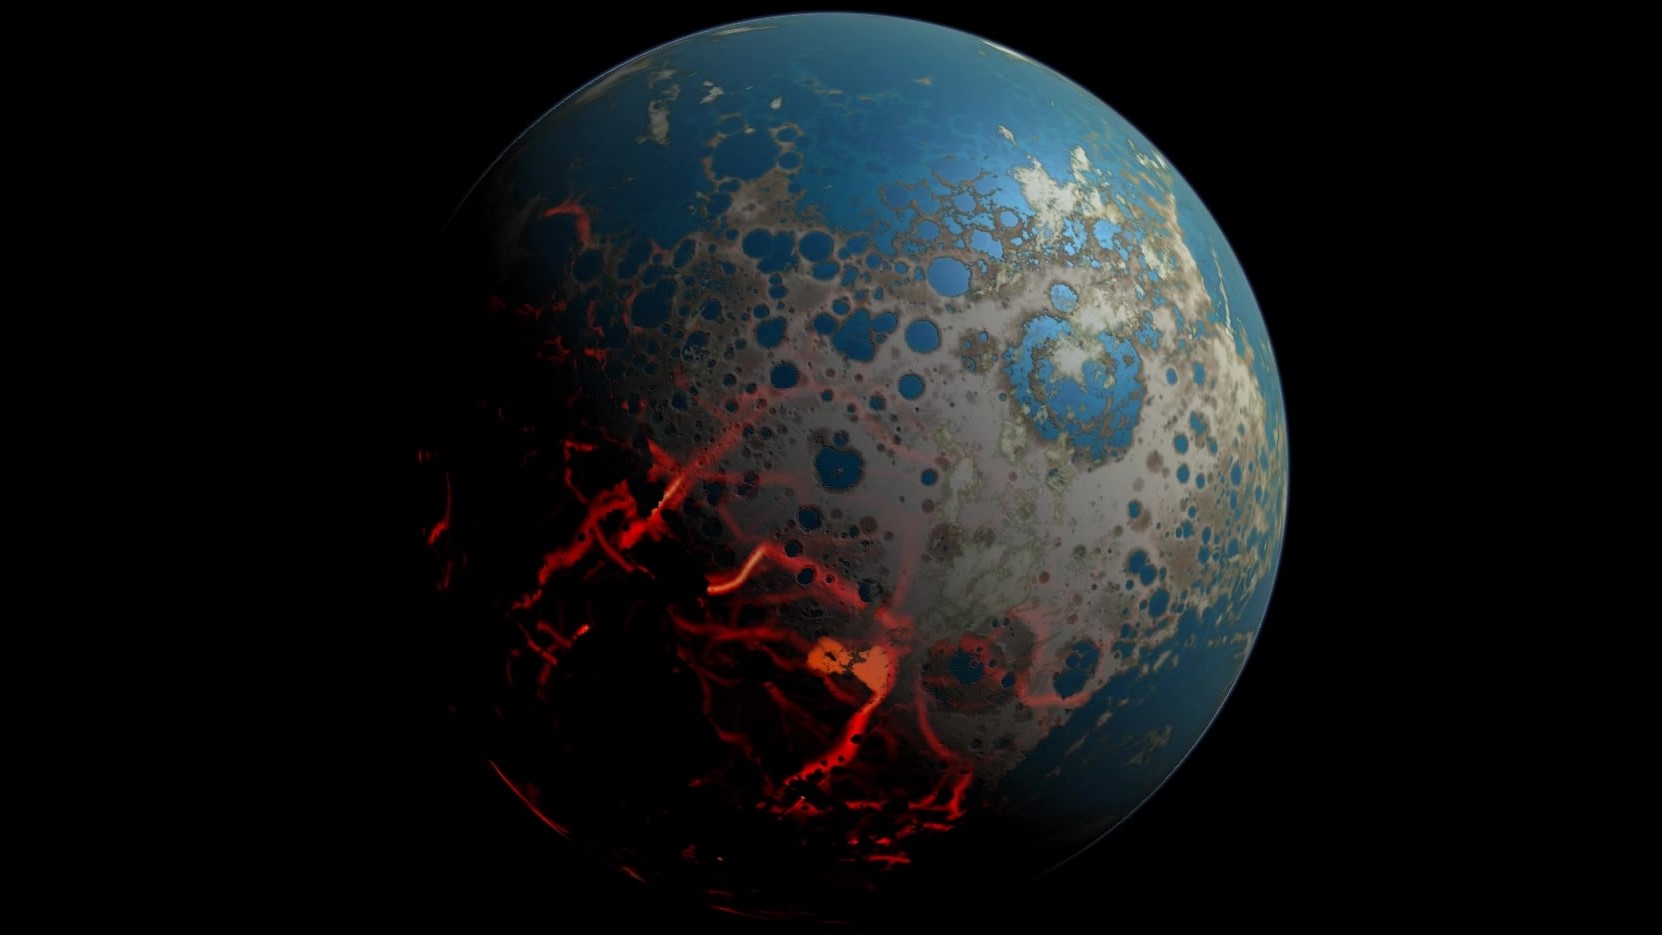 Early life on Earth and beyond may have been ocean dwellers